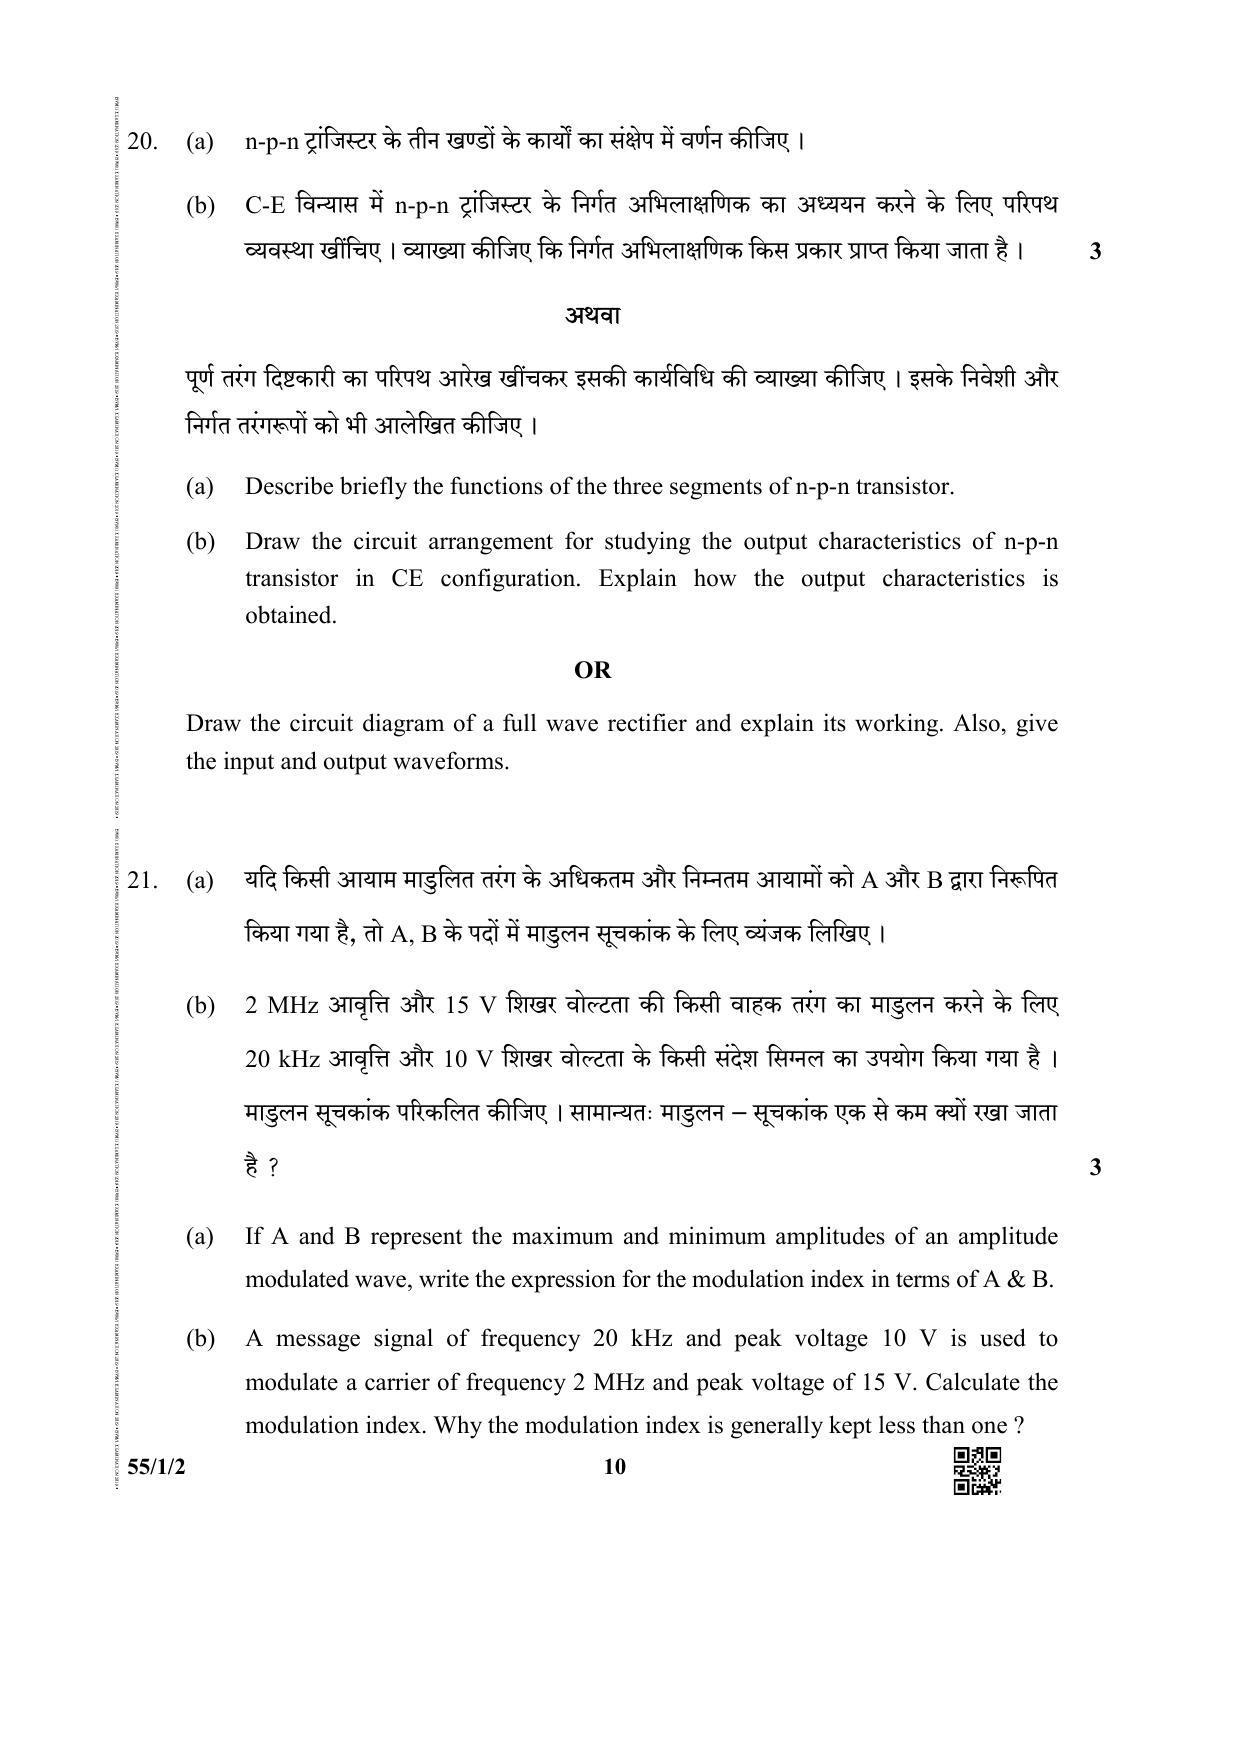 CBSE Class 12 55-1-2 (Physics) 2019 Question Paper - Page 10